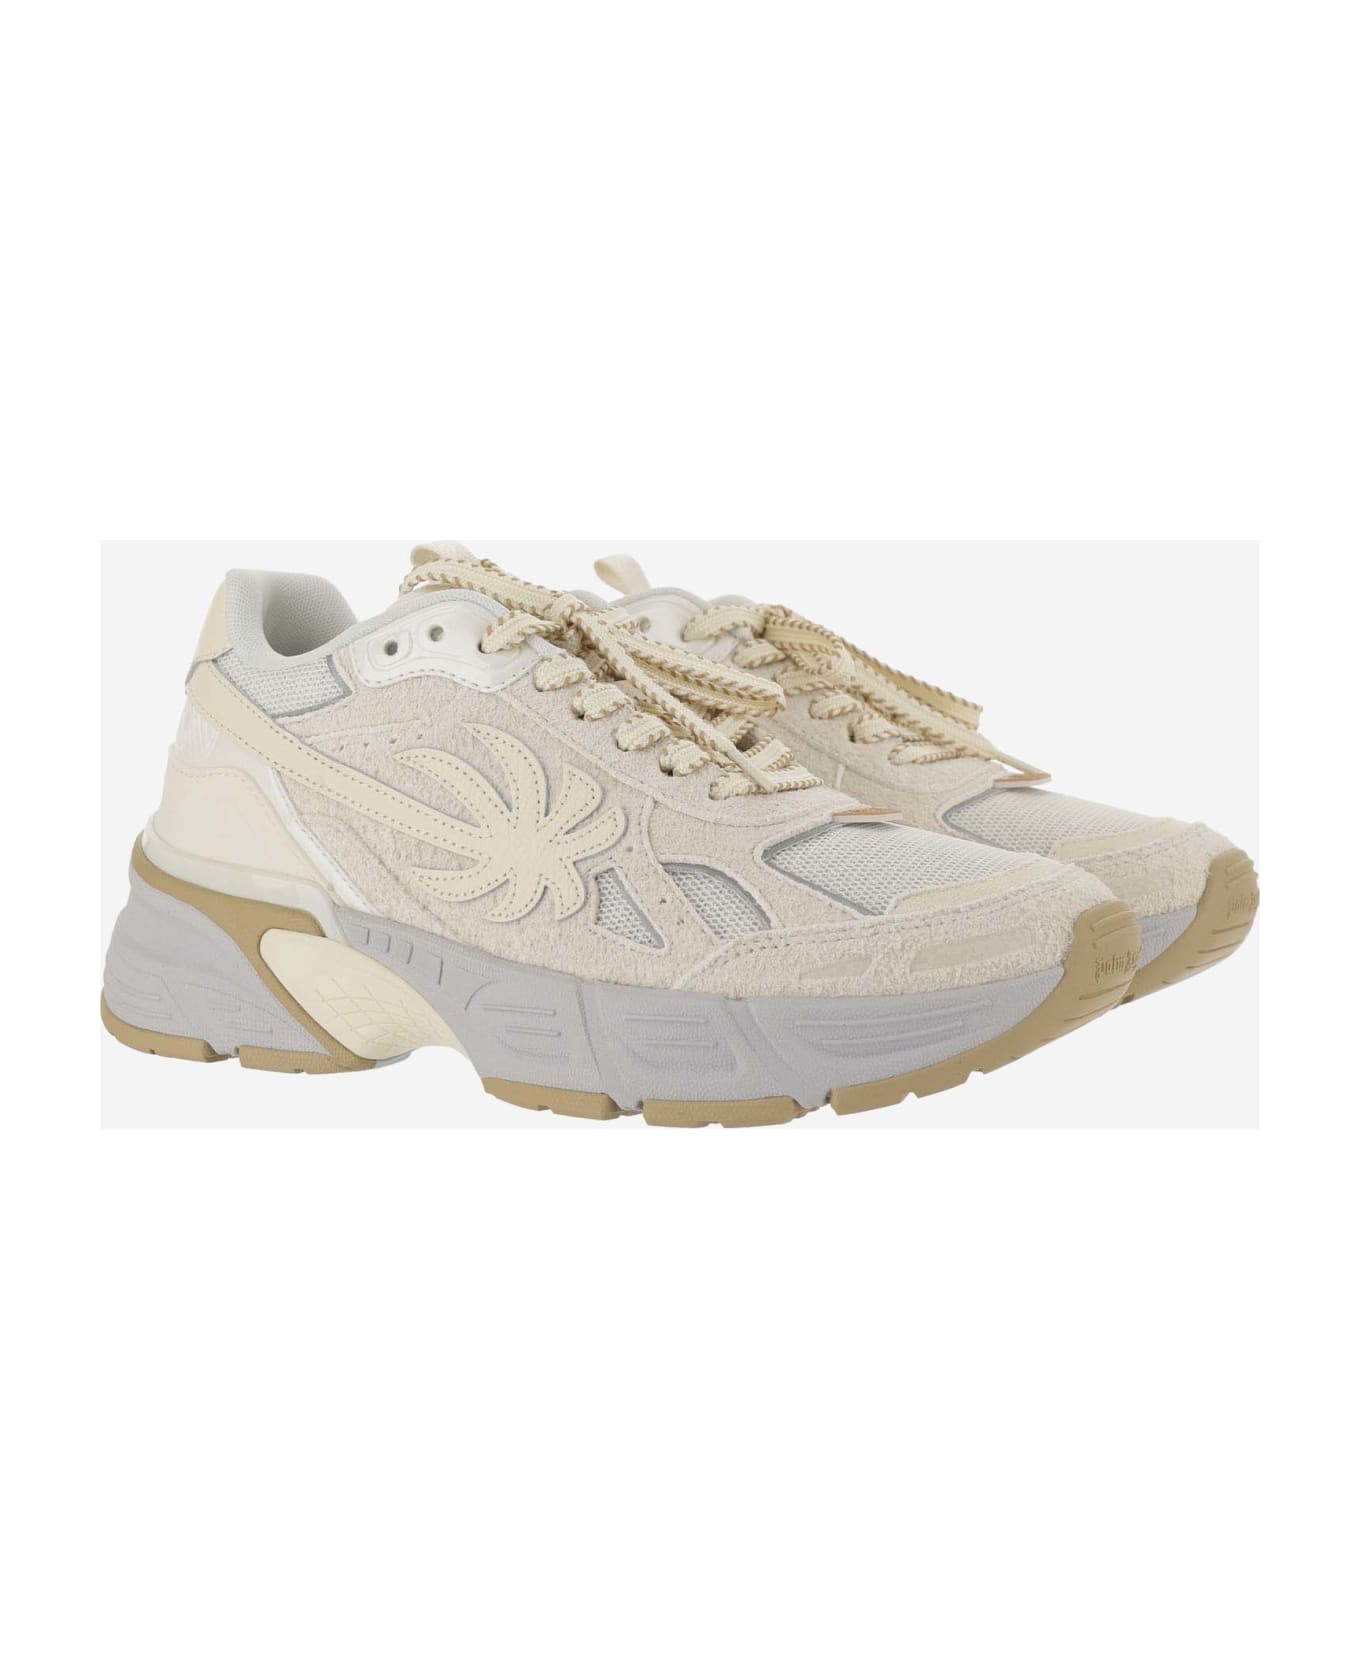 Palm Angels Multicolor Leather And Fabric Pa 4 Sneakers - Beige